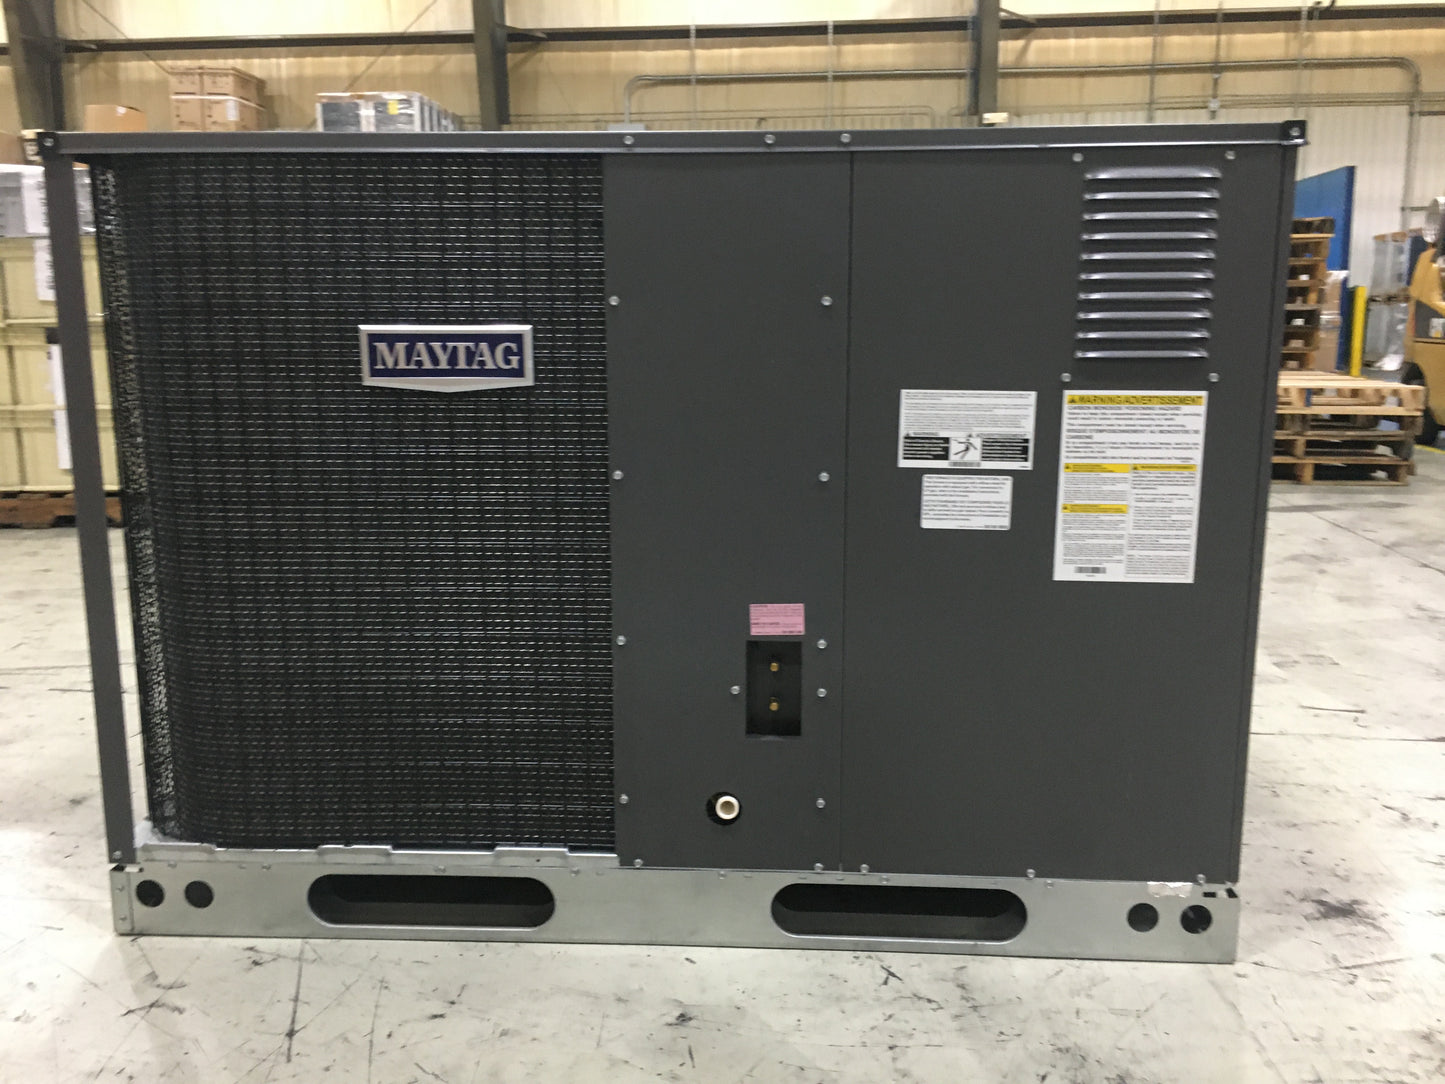 3.5 TON CONVERTIBLE NATURAL GAS/ELECTRIC PACKAGED UNIT, 14 SEER, 208-230/60/1, R410A